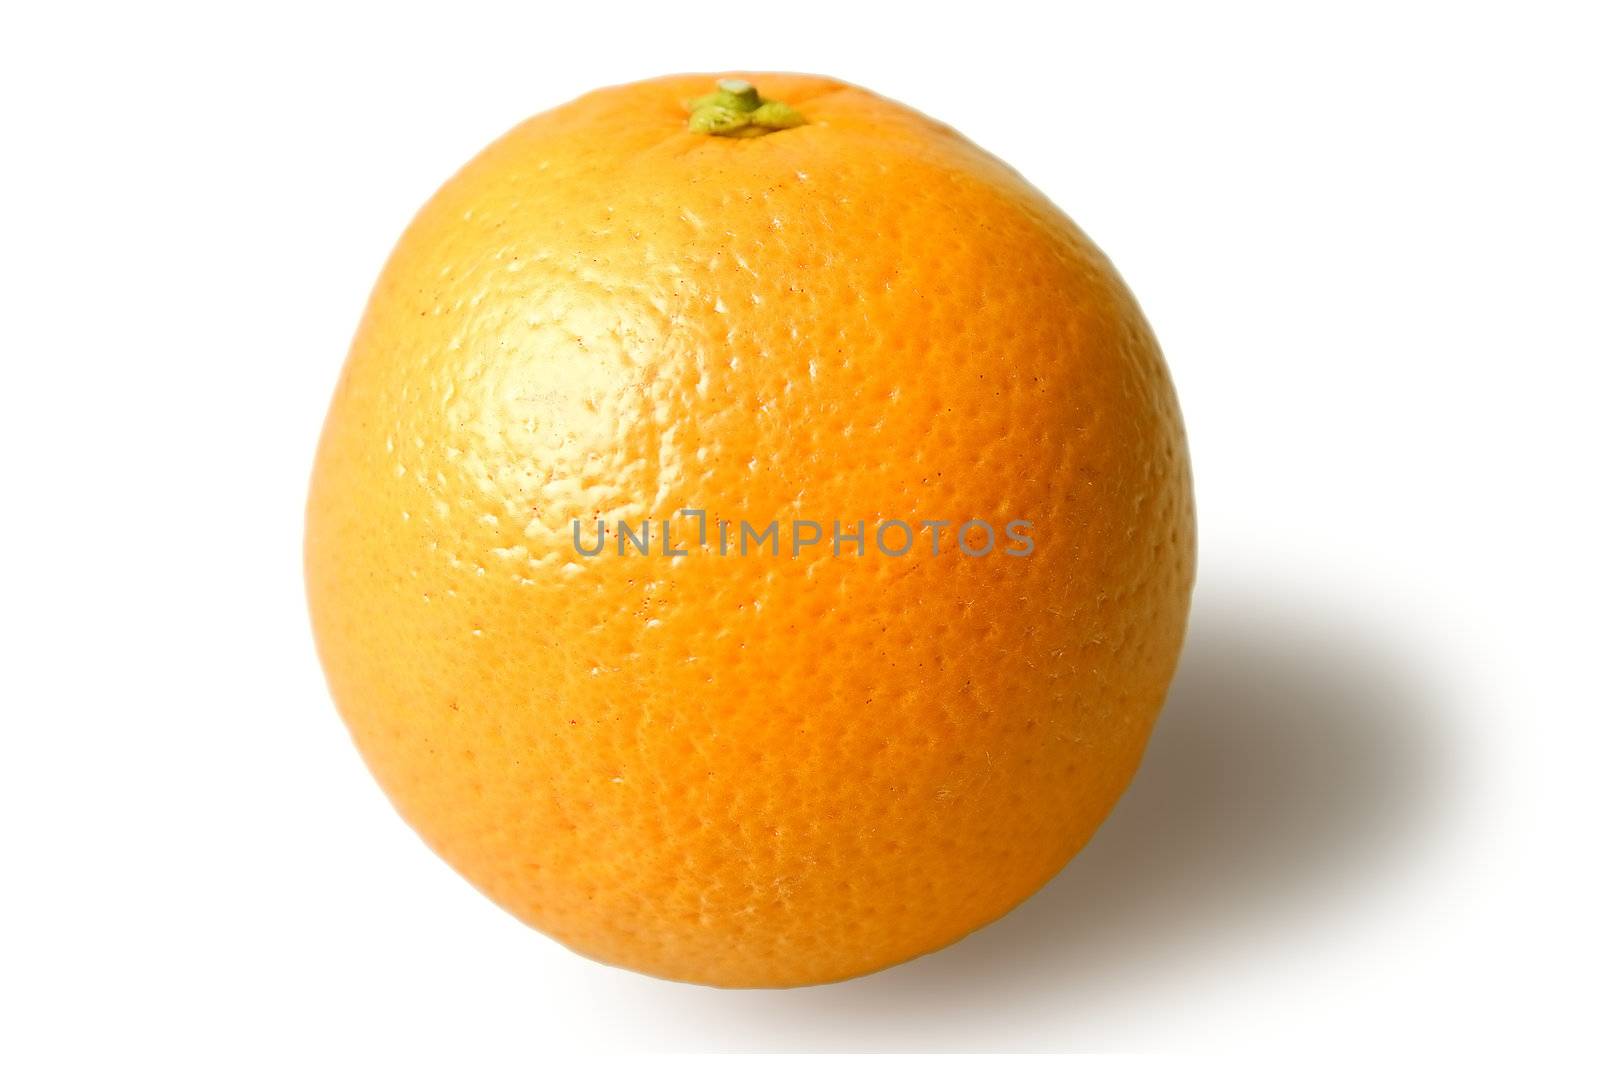 ripe juicy orange orange with the gone into a detail texture of hide on a white background